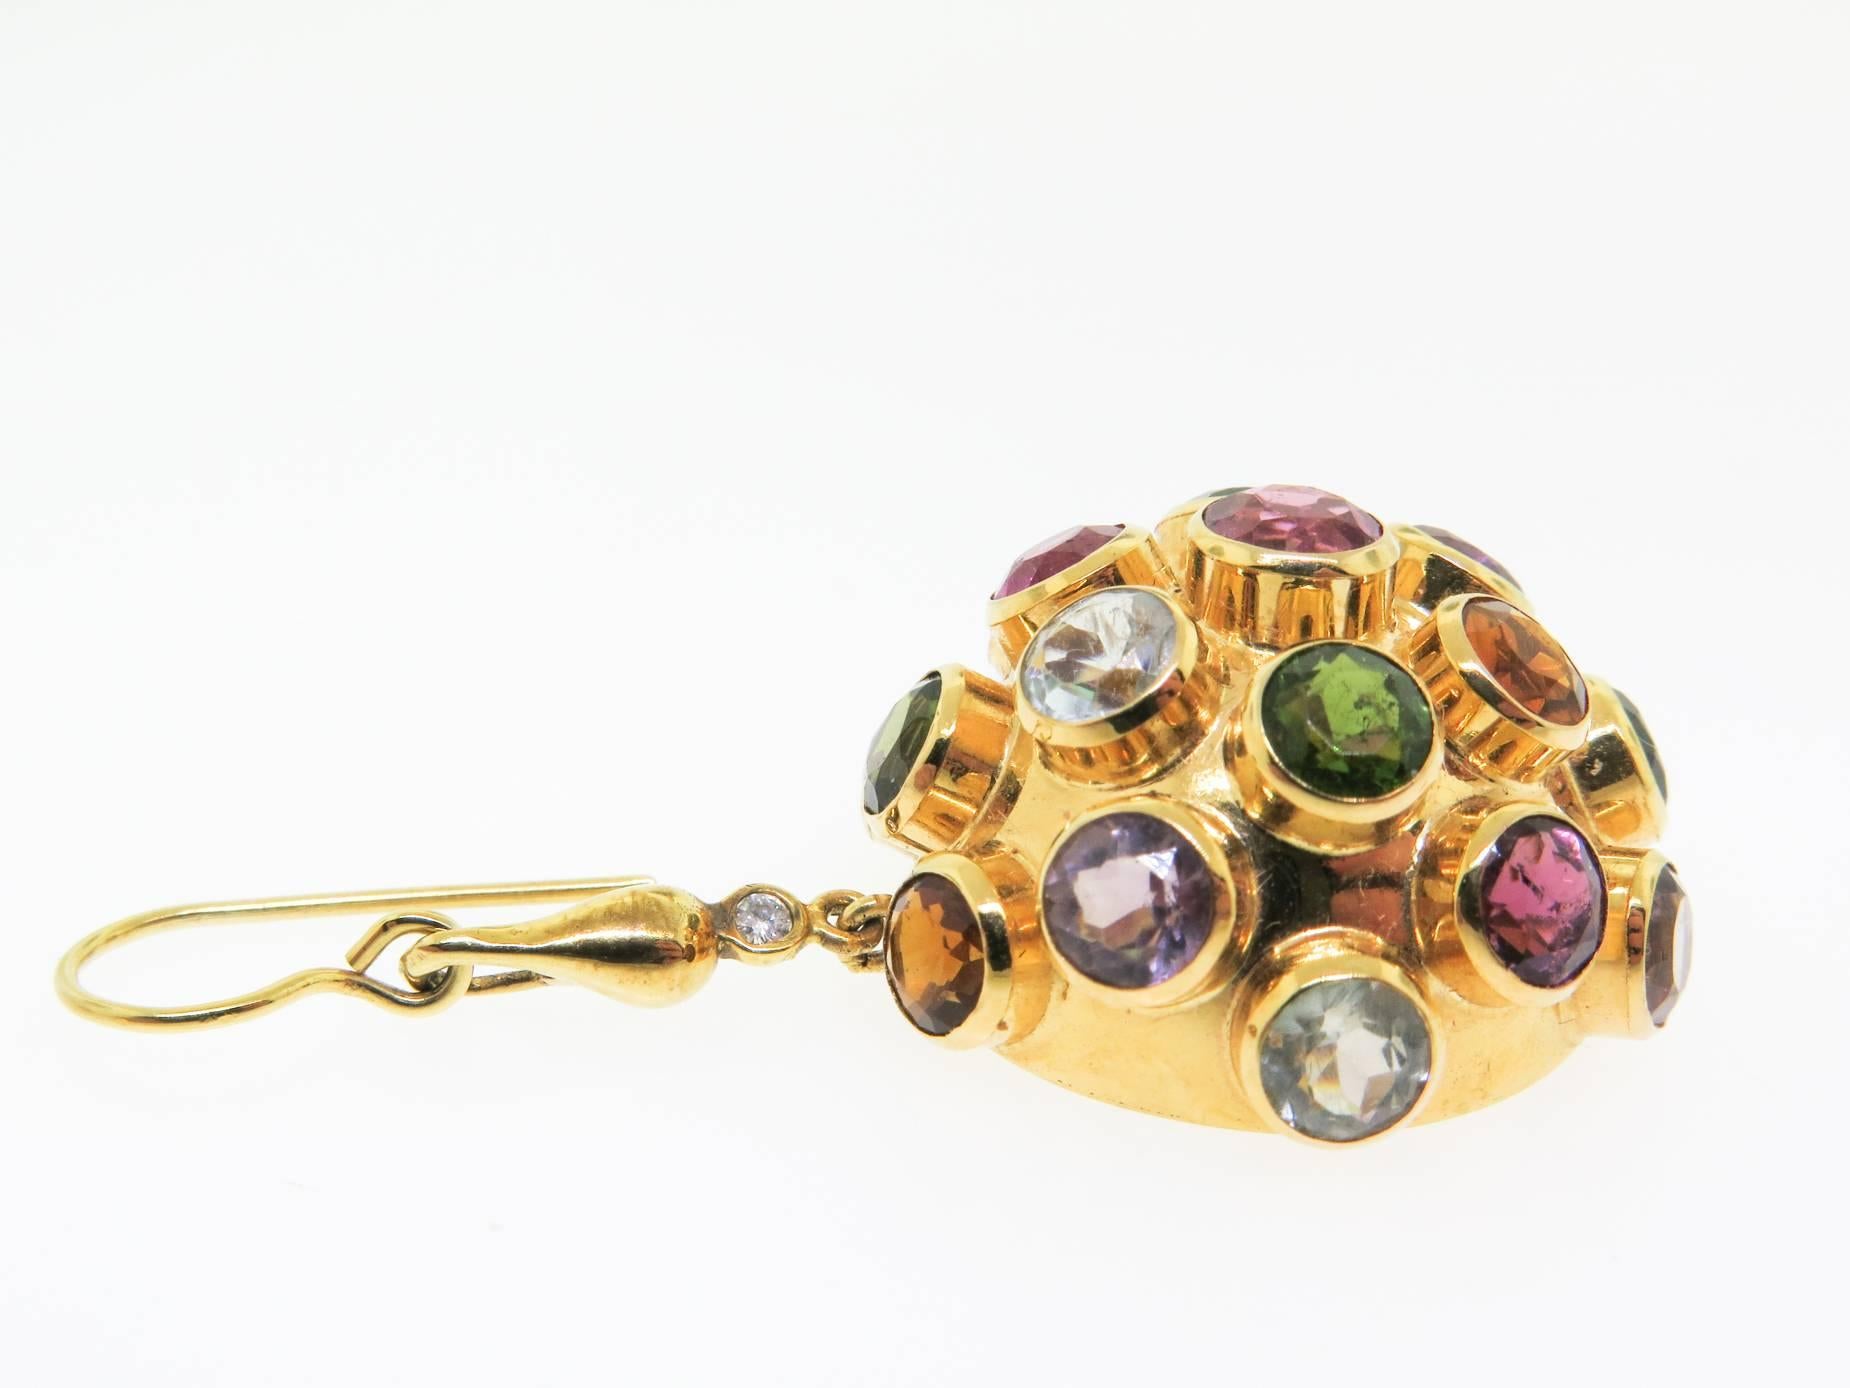 A magnificent pair of earrings featuring multicolor gemstones adorned with round brilliant cut diamonds on the top of the half round drop. For a dash of color and class, wear Amethyst, Green and Pink Tourmaline, Peridot, Citrine and Blue Zircon in